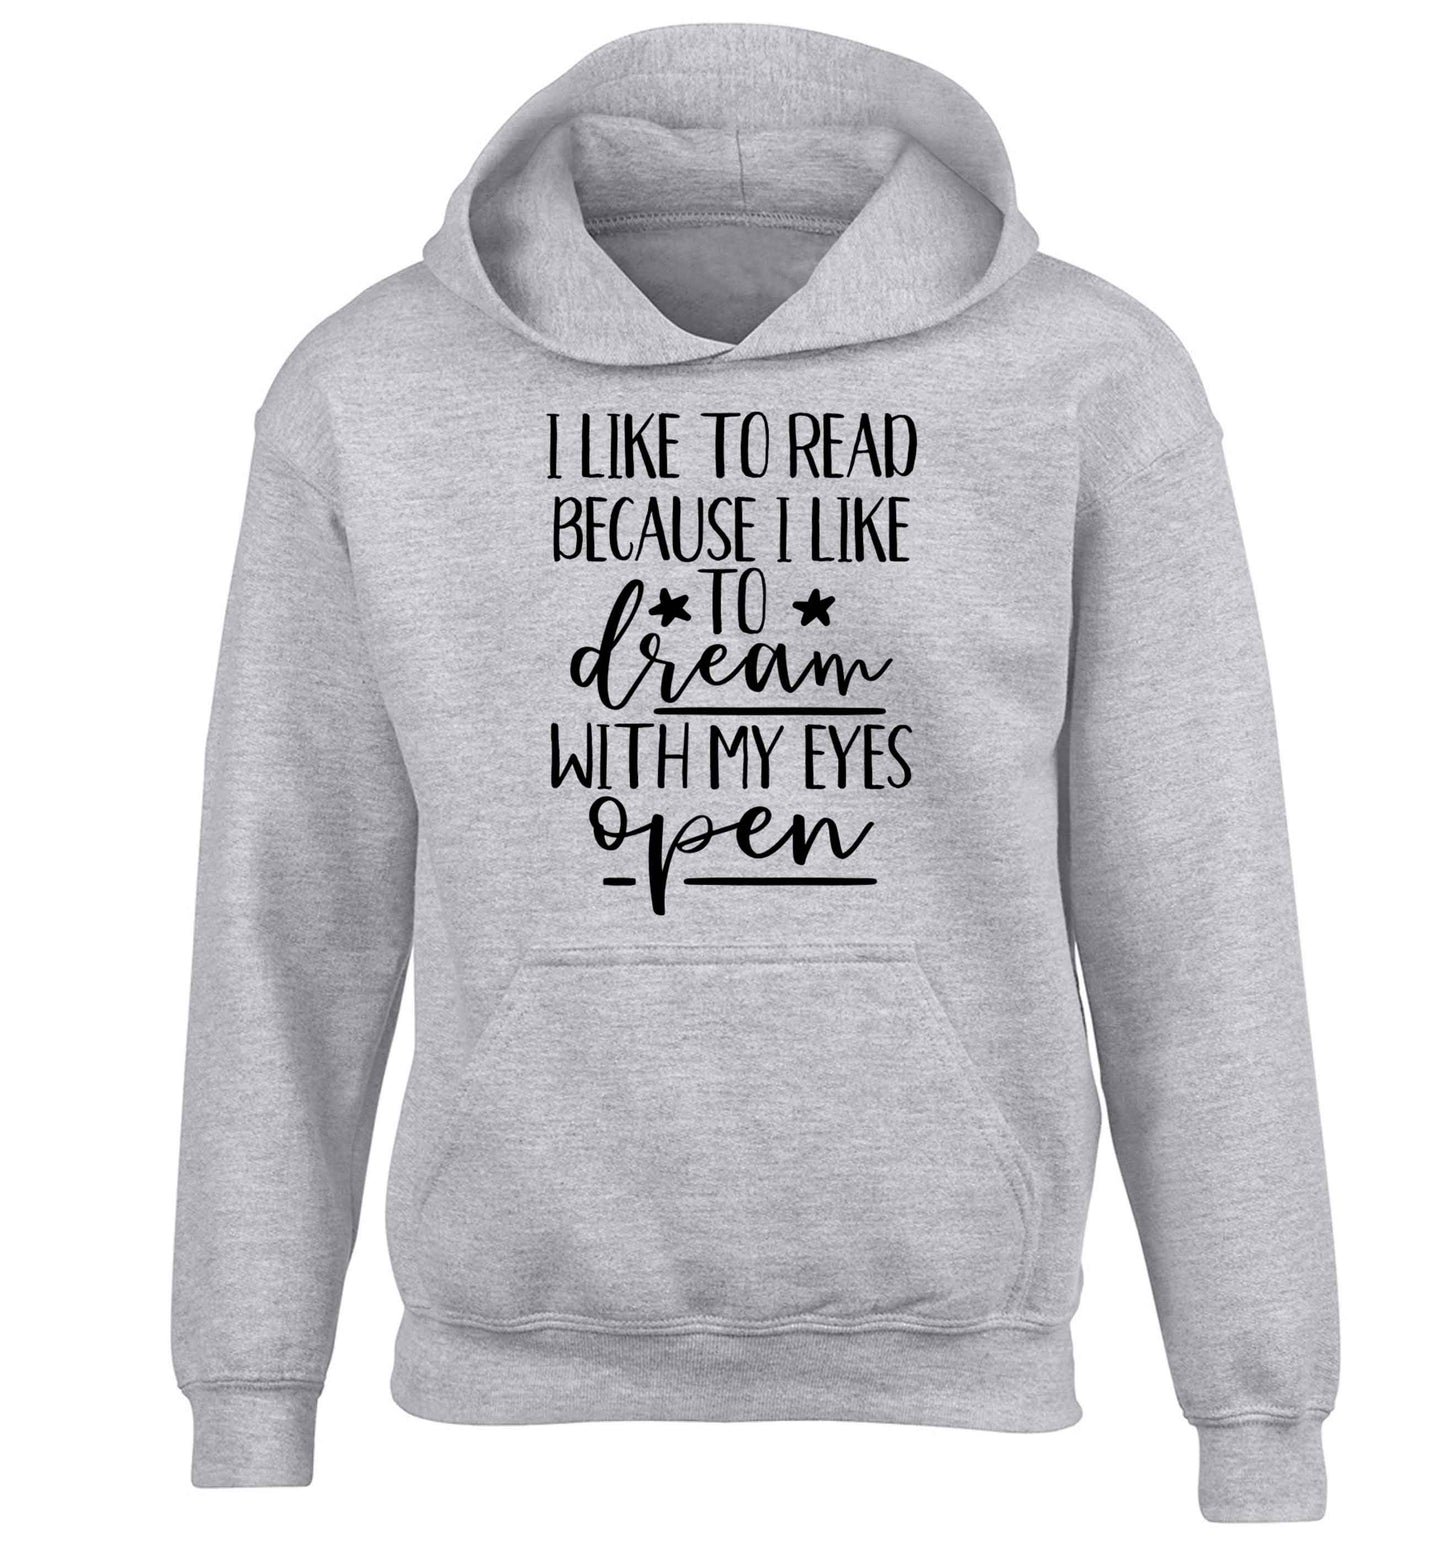 I like to read because I like to dream with my eyes open children's grey hoodie 12-13 Years